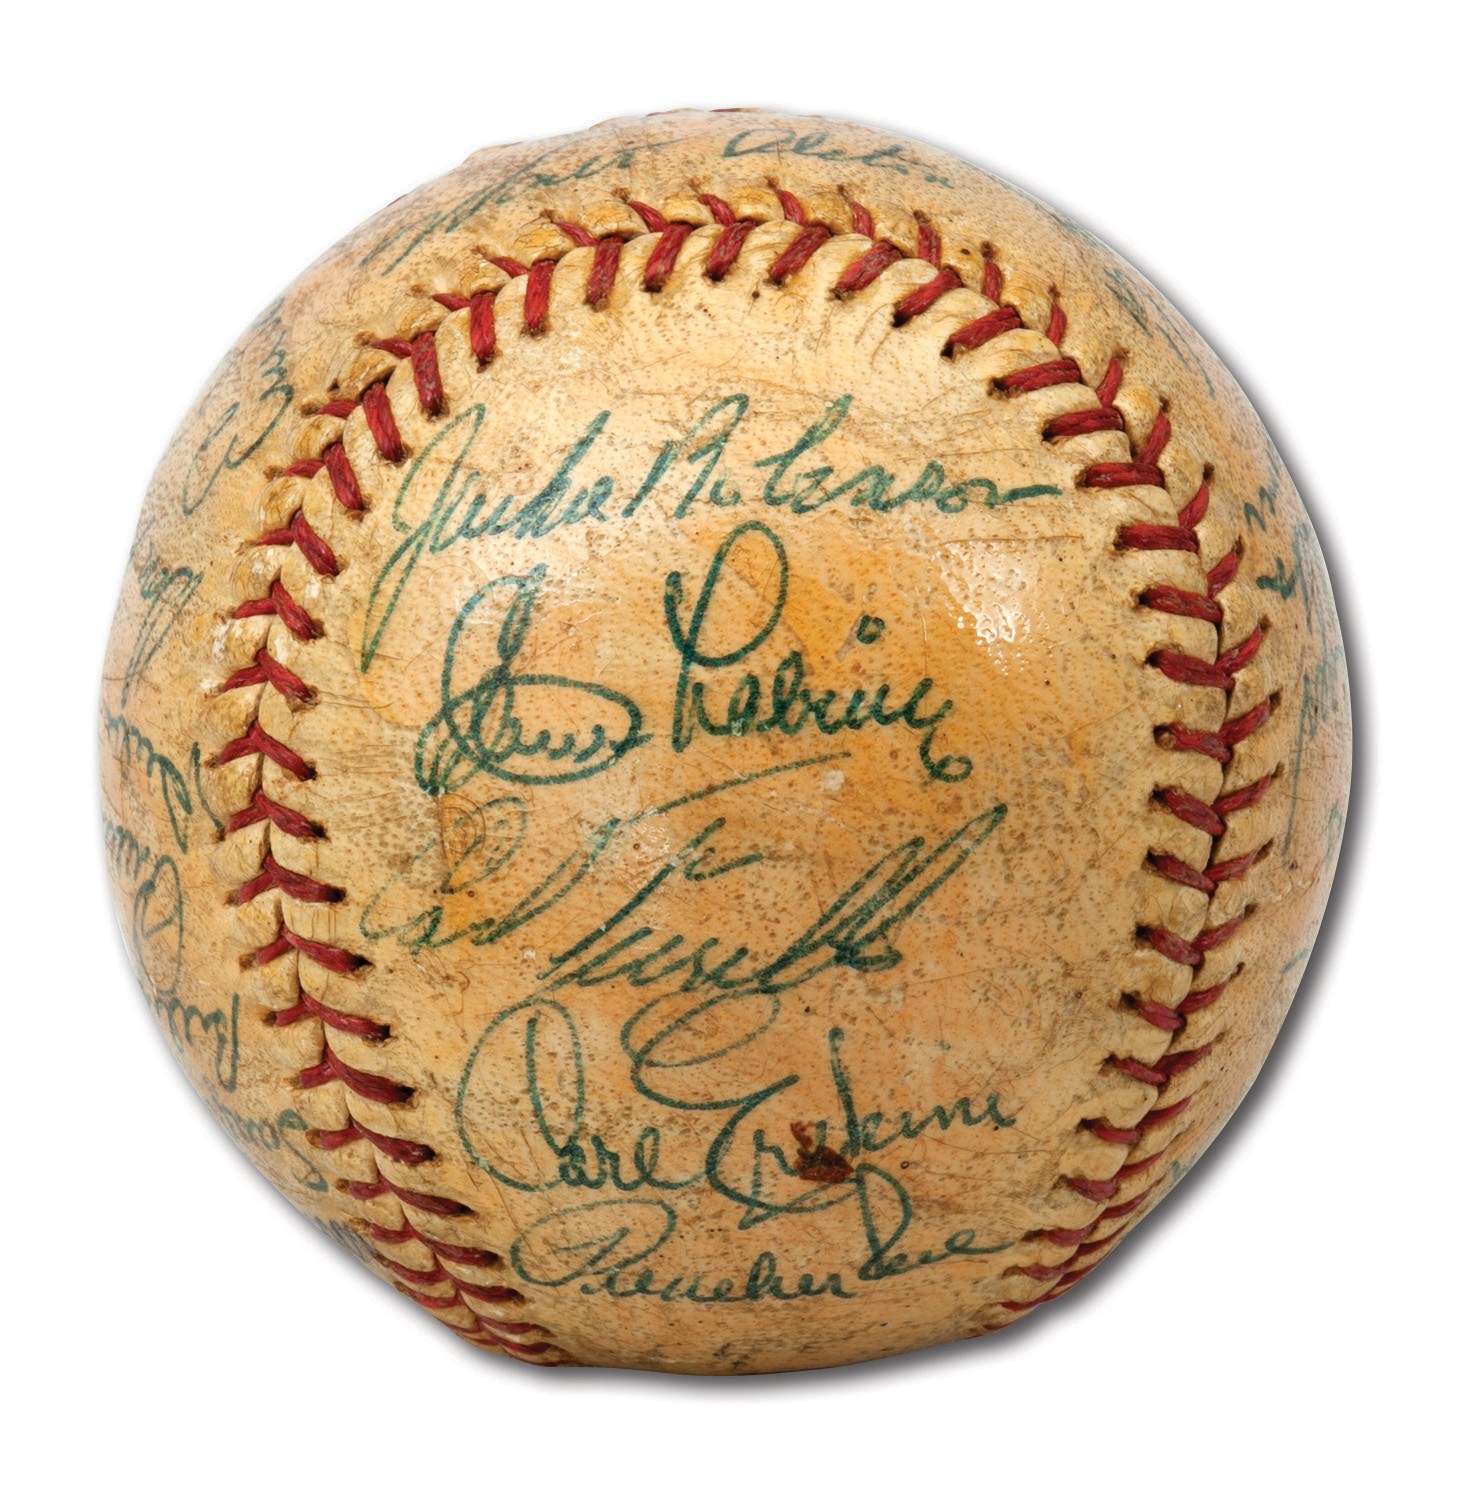 Sold at Auction: Baseball Memorabilia Archive Ft. Brooklyn Dodgers